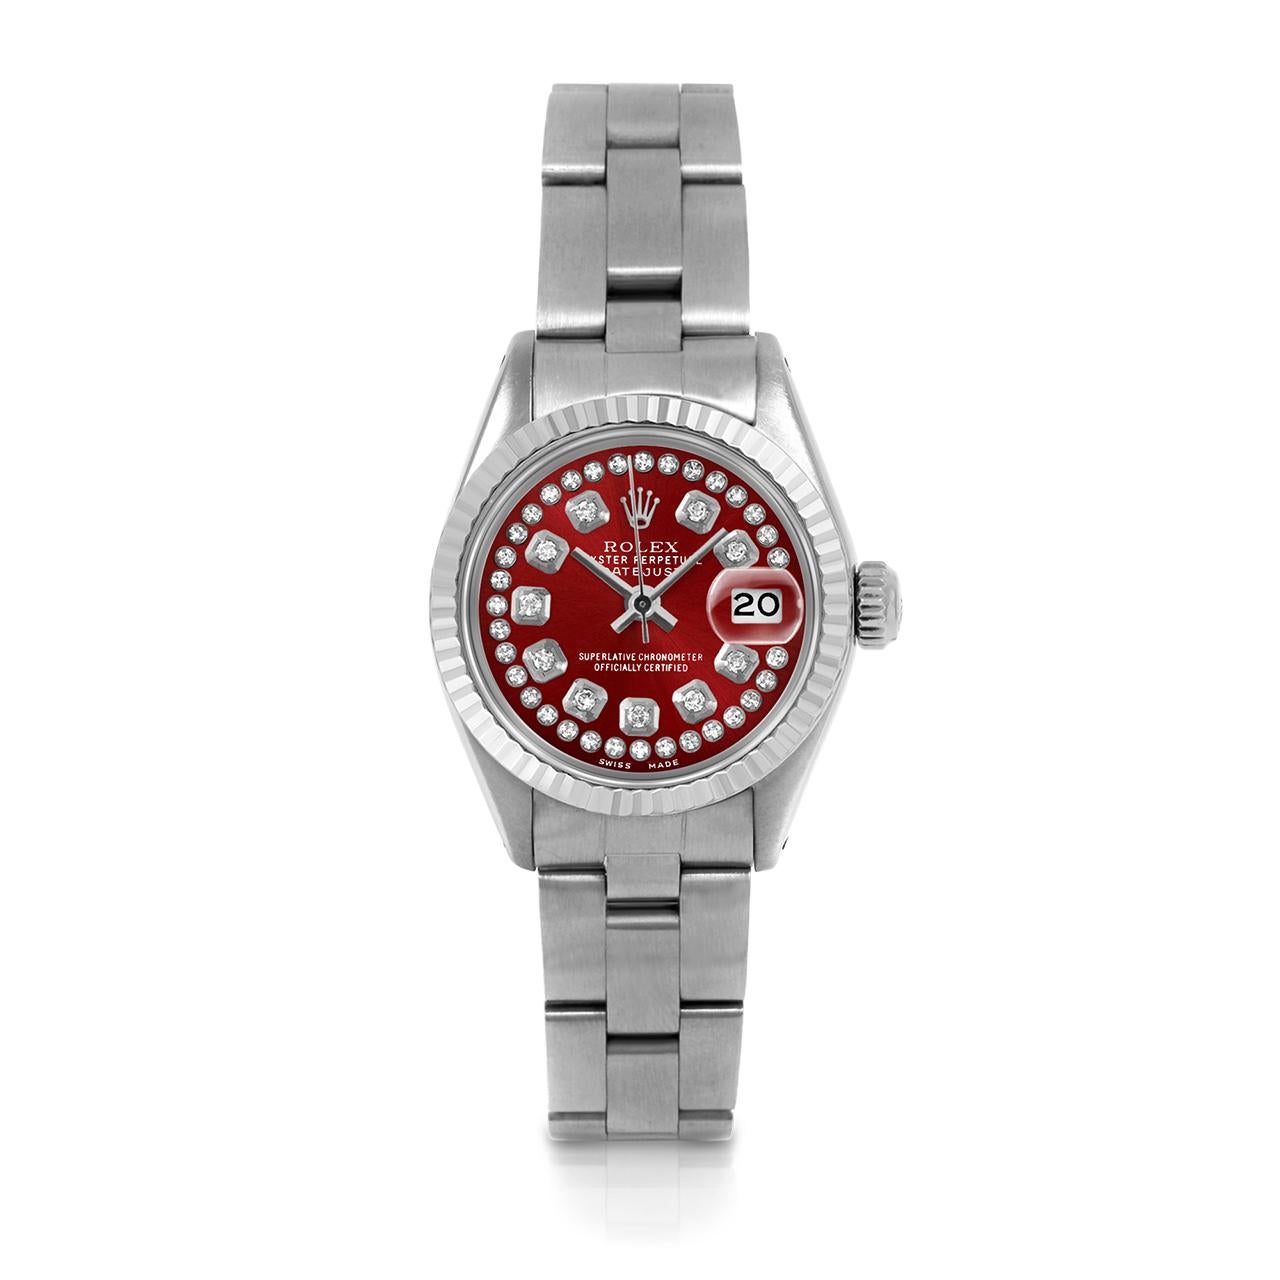 Pre-Owned Rolex 6917 Ladies 26mm Datejust Watch, Custom Red String Diamond Dial & Fluted Bezel on Rolex Stainless Steel Oyster Band.   

SKU 6917-SS-RED-STRD-FLT-OYS


Brand/Model:        Rolex Datejust
Model Number:        6917
Style:       